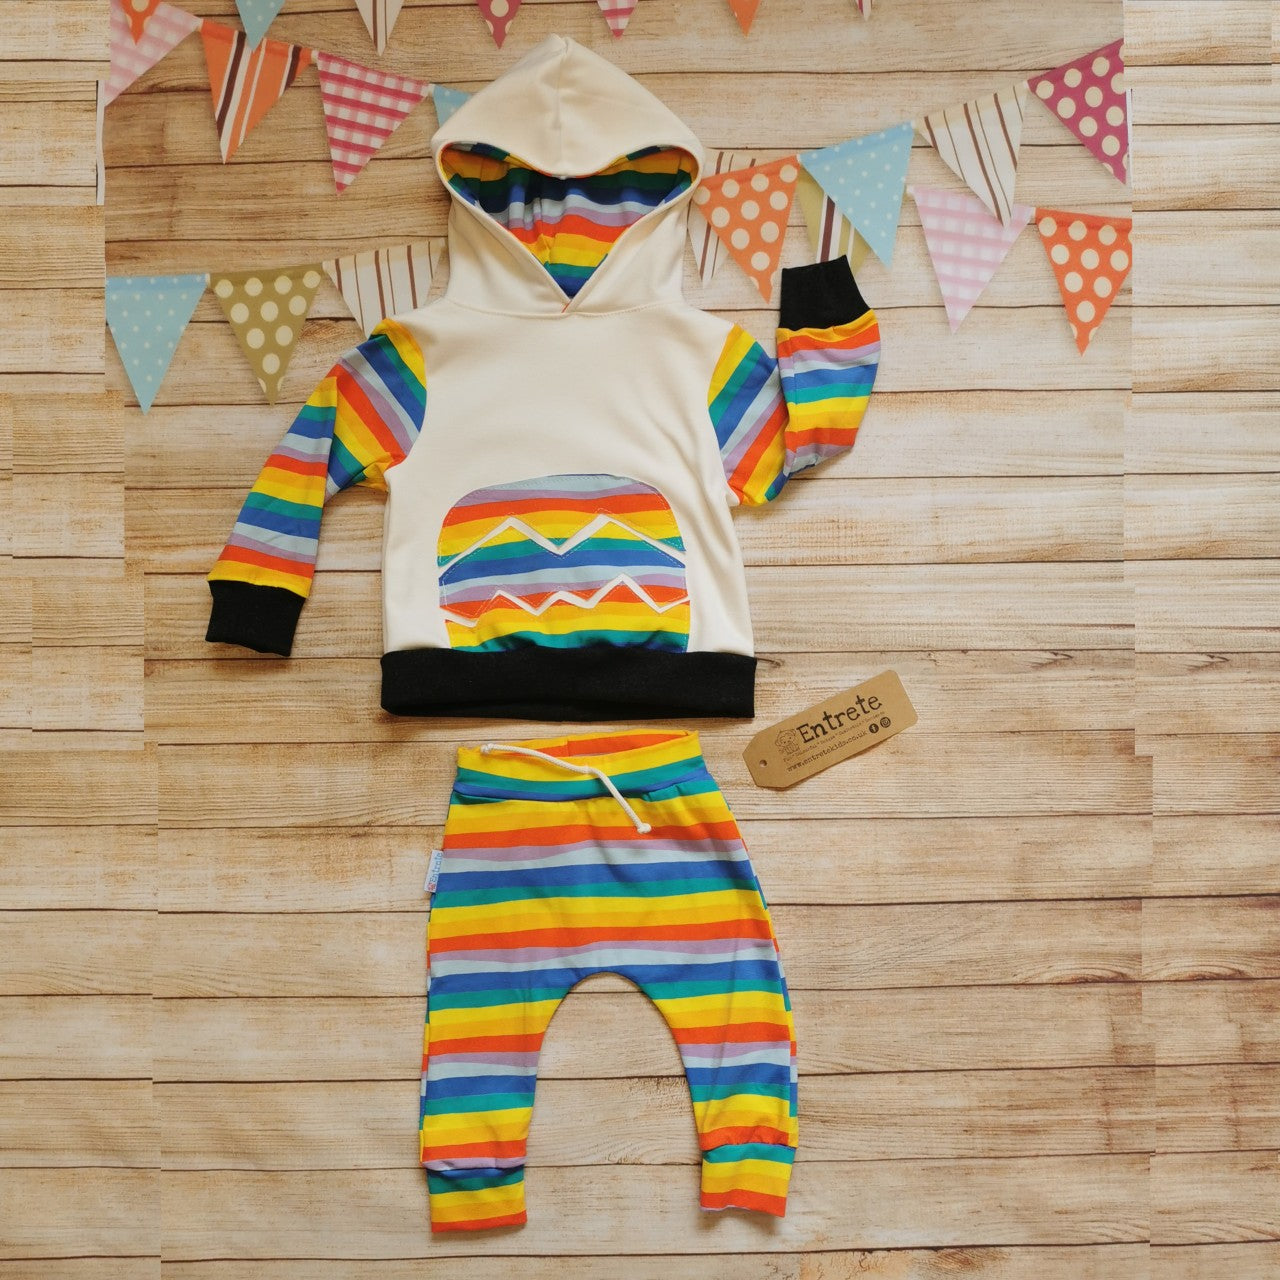 A matching red rainbow striped cracked egg hoodie, shown as a possible matching outfit. (sold separately)